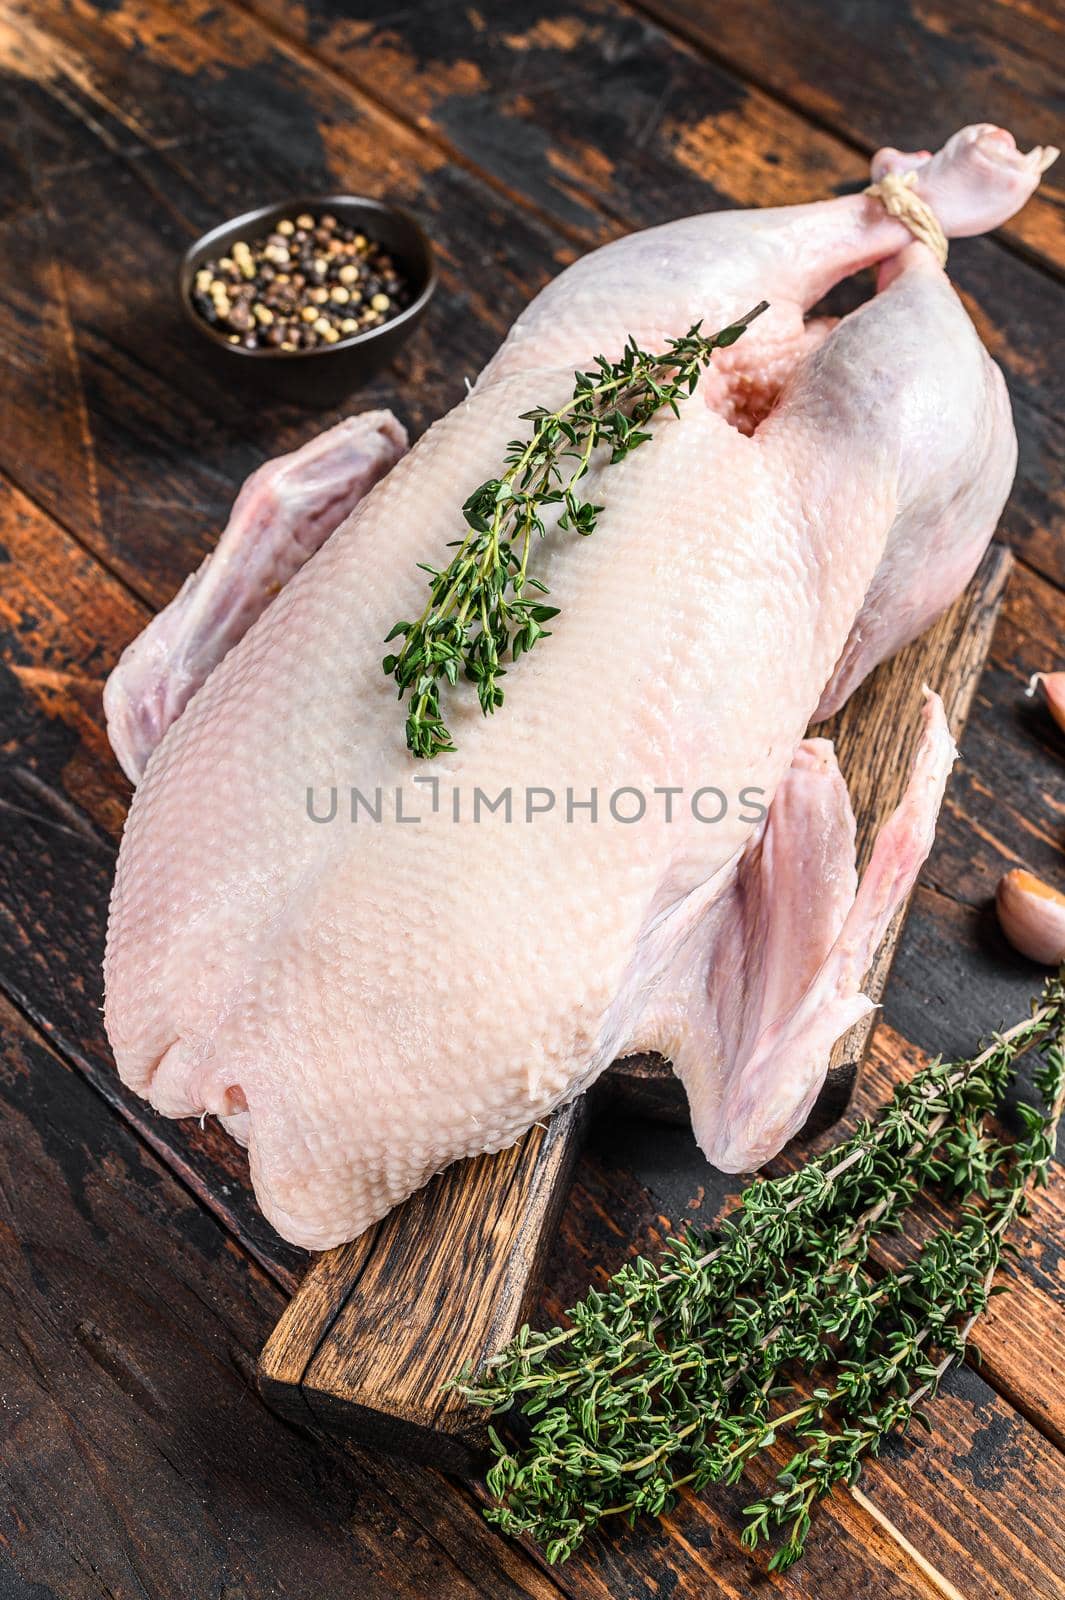 Raw whole mallard duck, poultry meat with herbs. Dark wooden background. Top view.